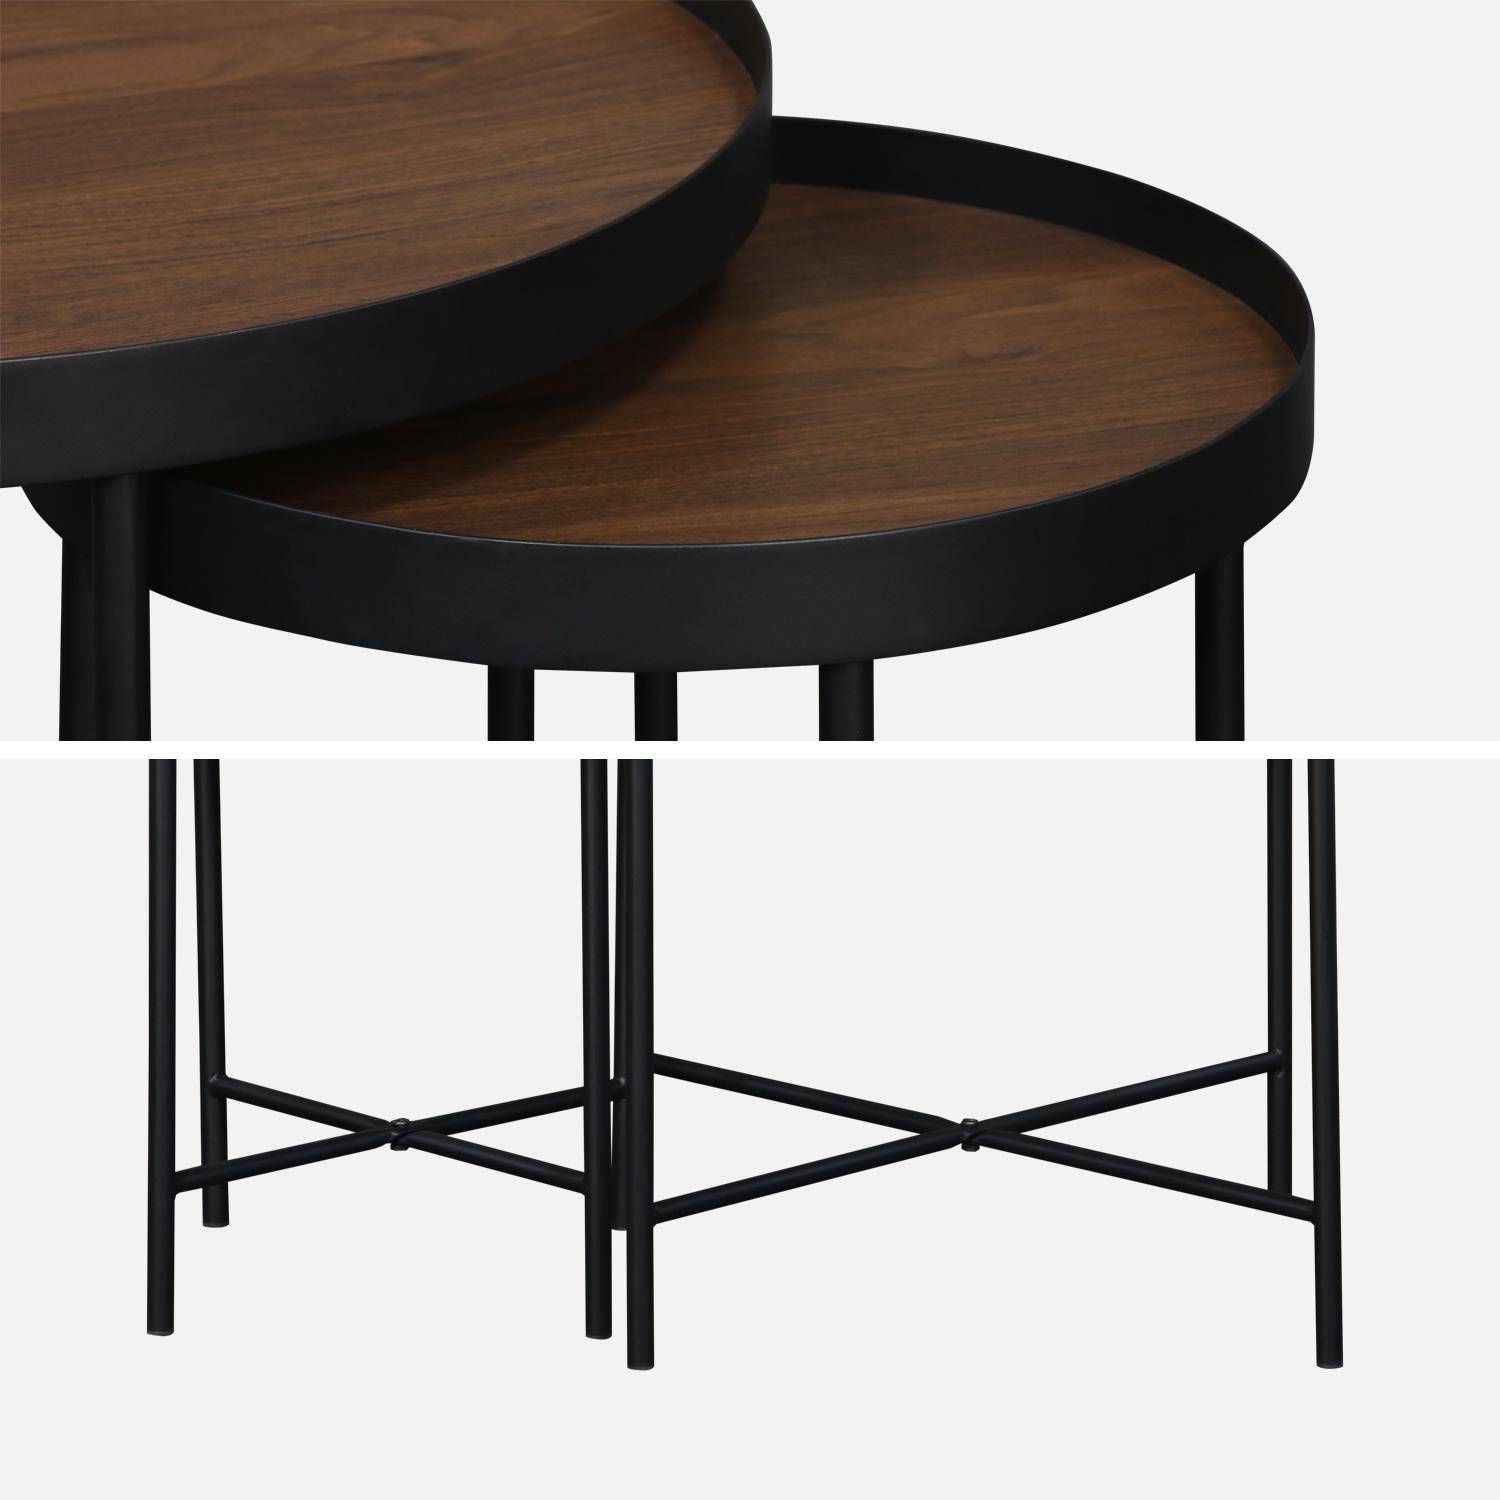 Set of 2 practical round nesting tables in walnut-effect MDF with black legs Photo5